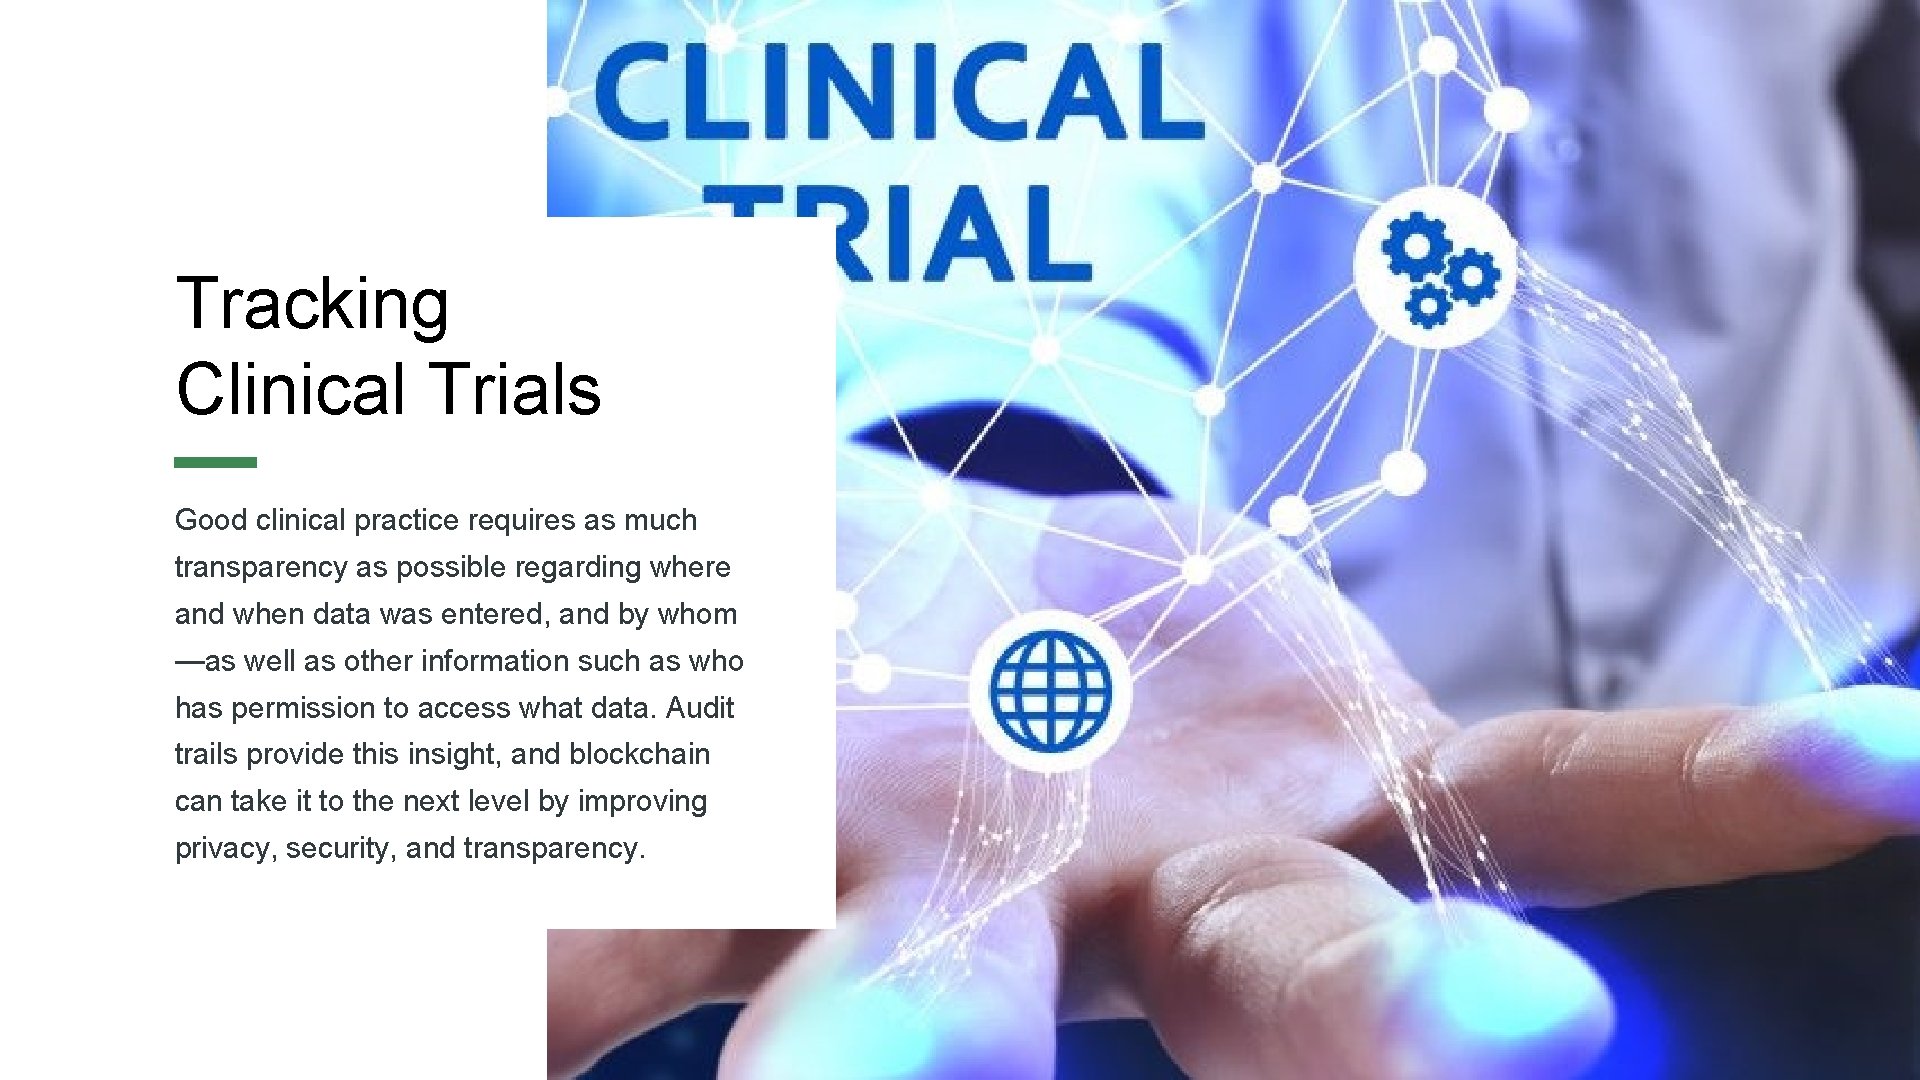 11 Tracking Clinical Trials Good clinical practice requires as much transparency as possible regarding